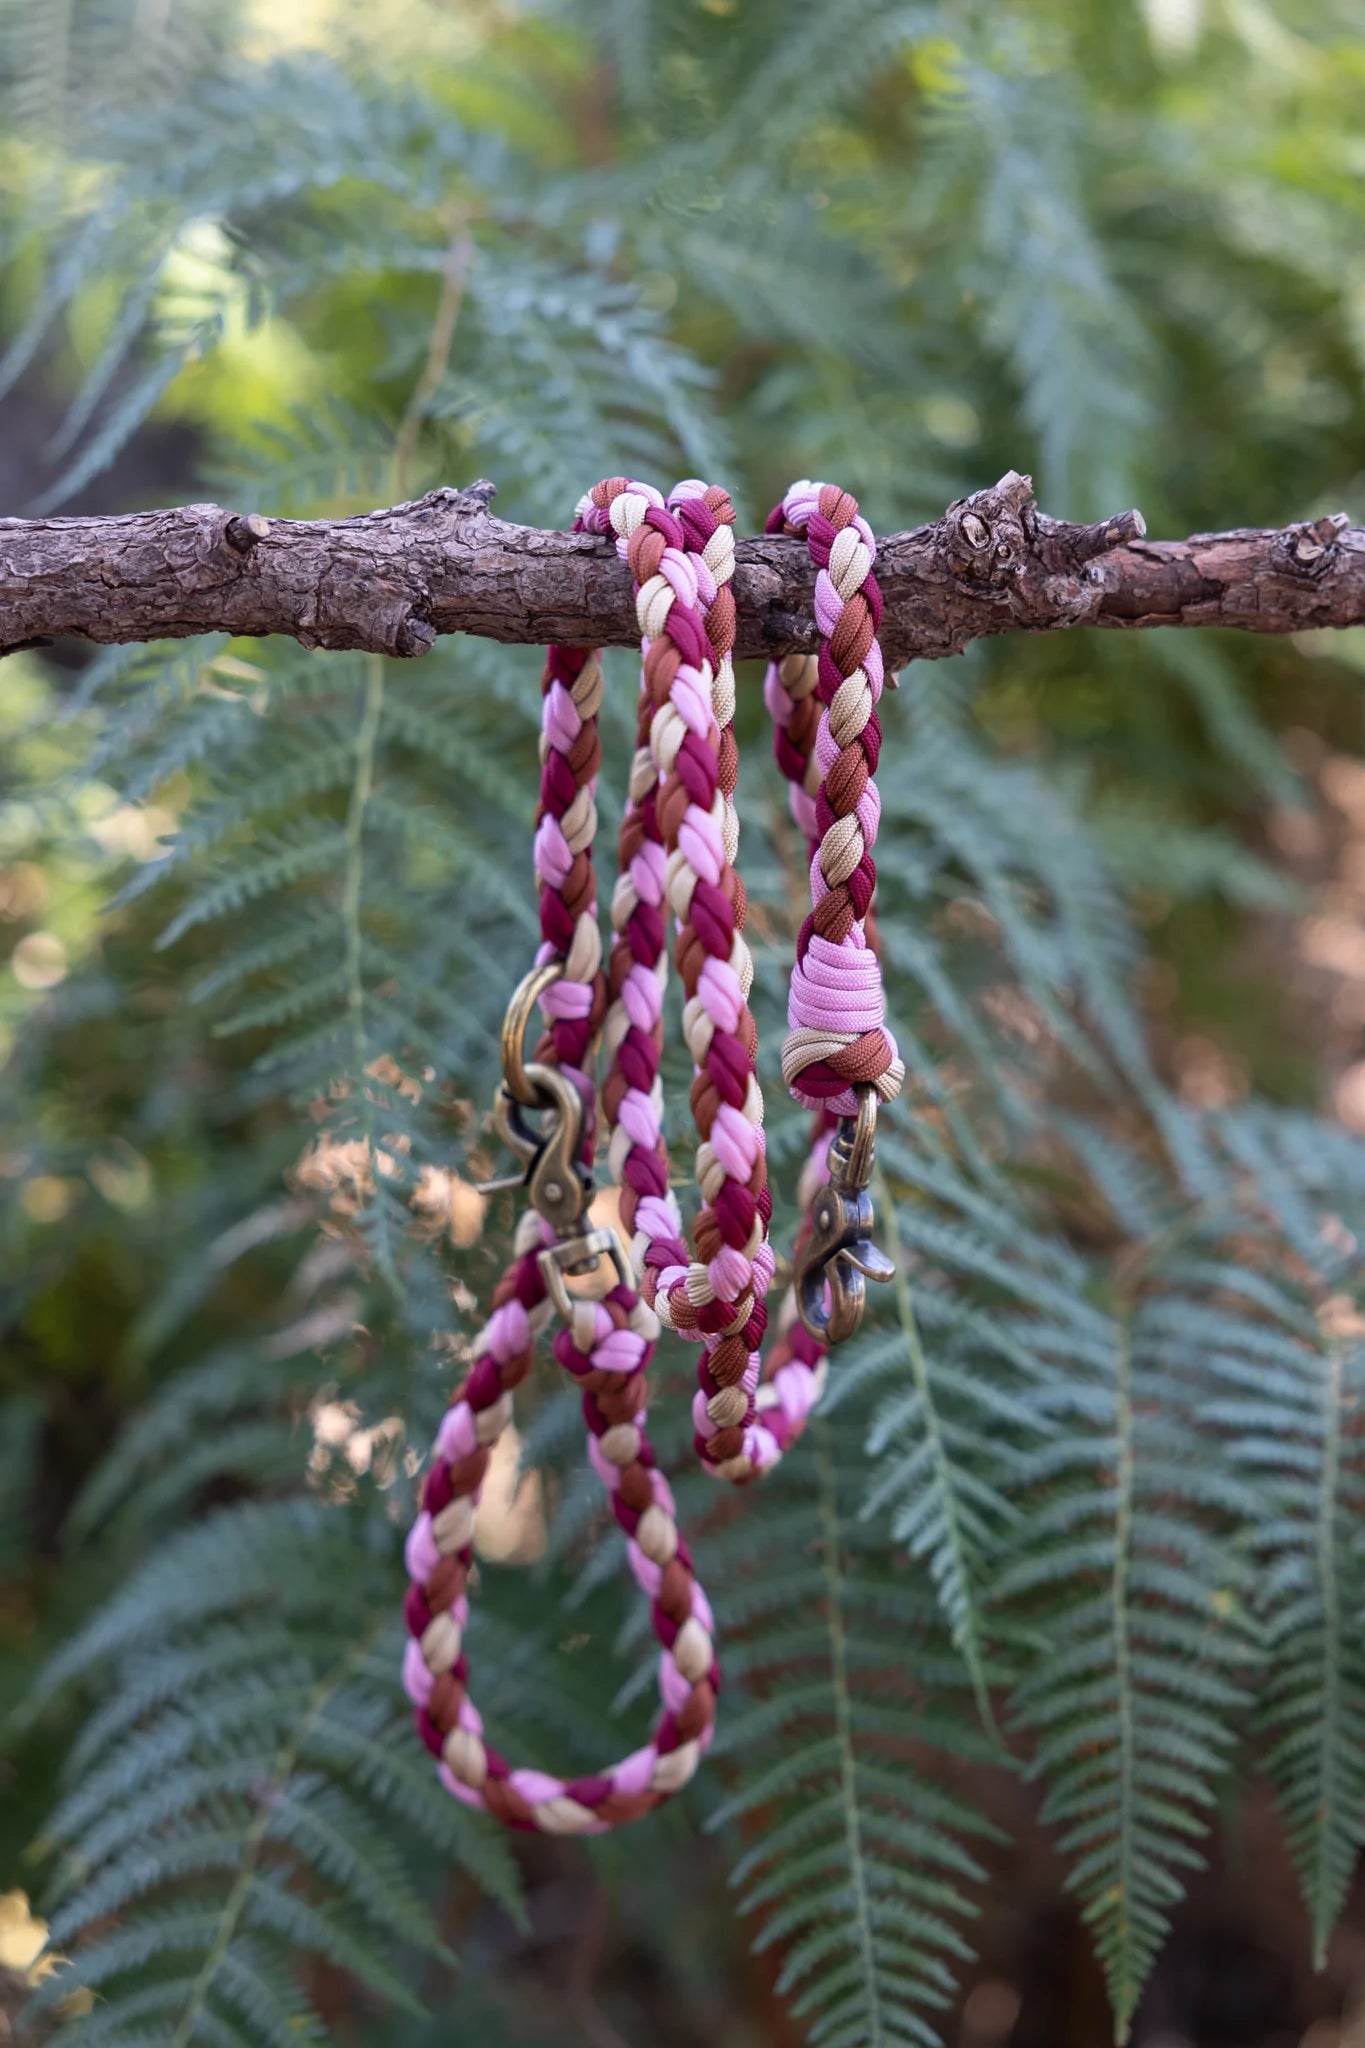 Custom Paracord Wildwoods Lead - Design your own